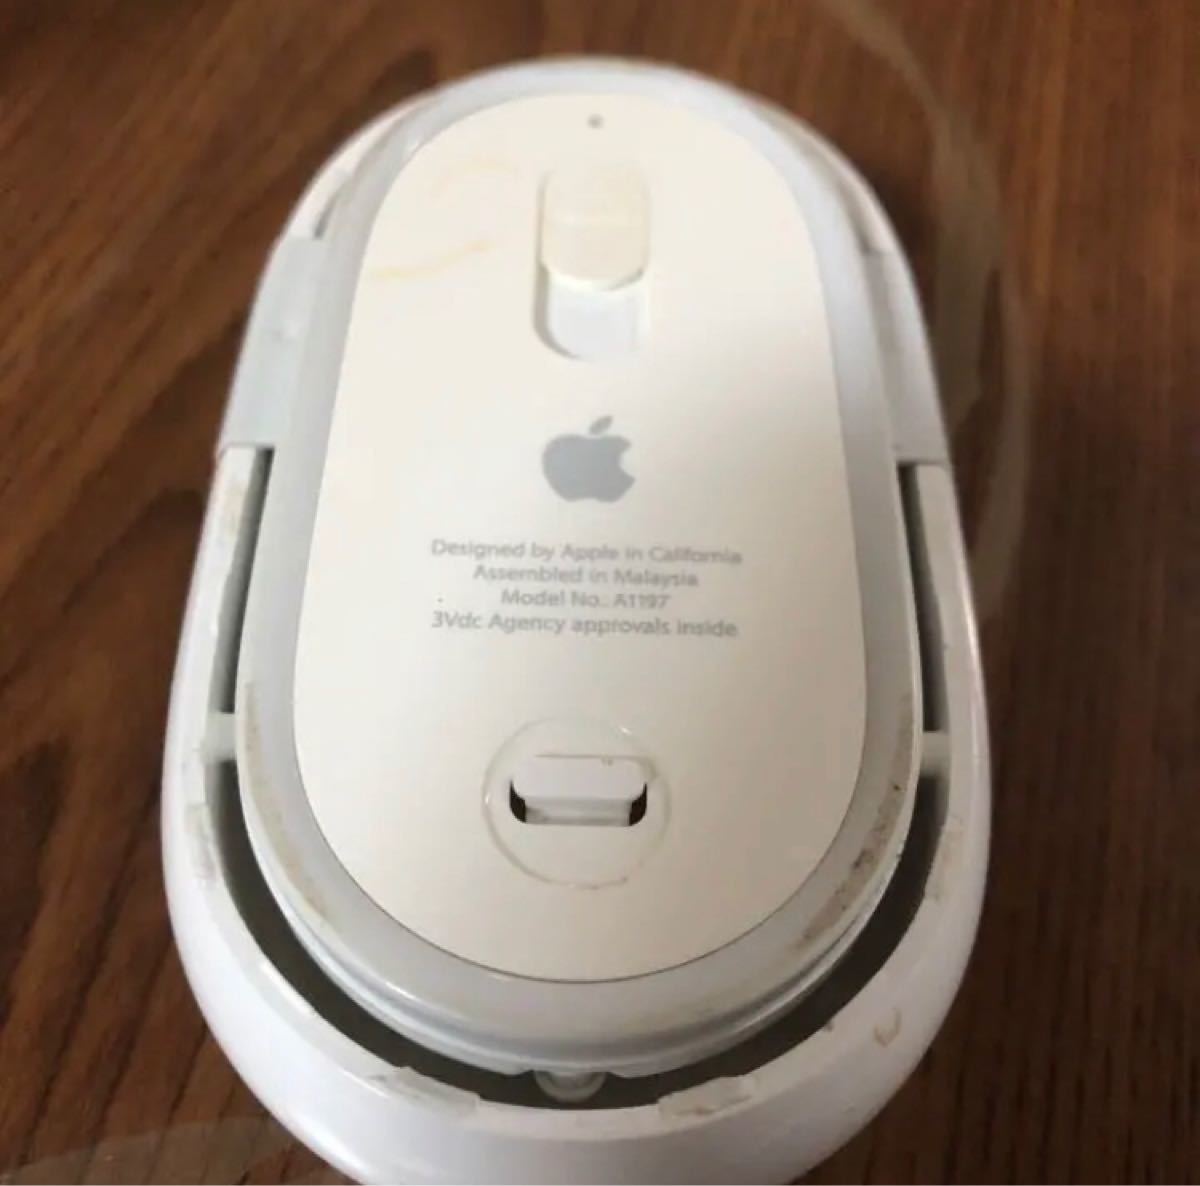 Apple ワイヤレスマウス Mighty Mouse A1197 ジャンク品